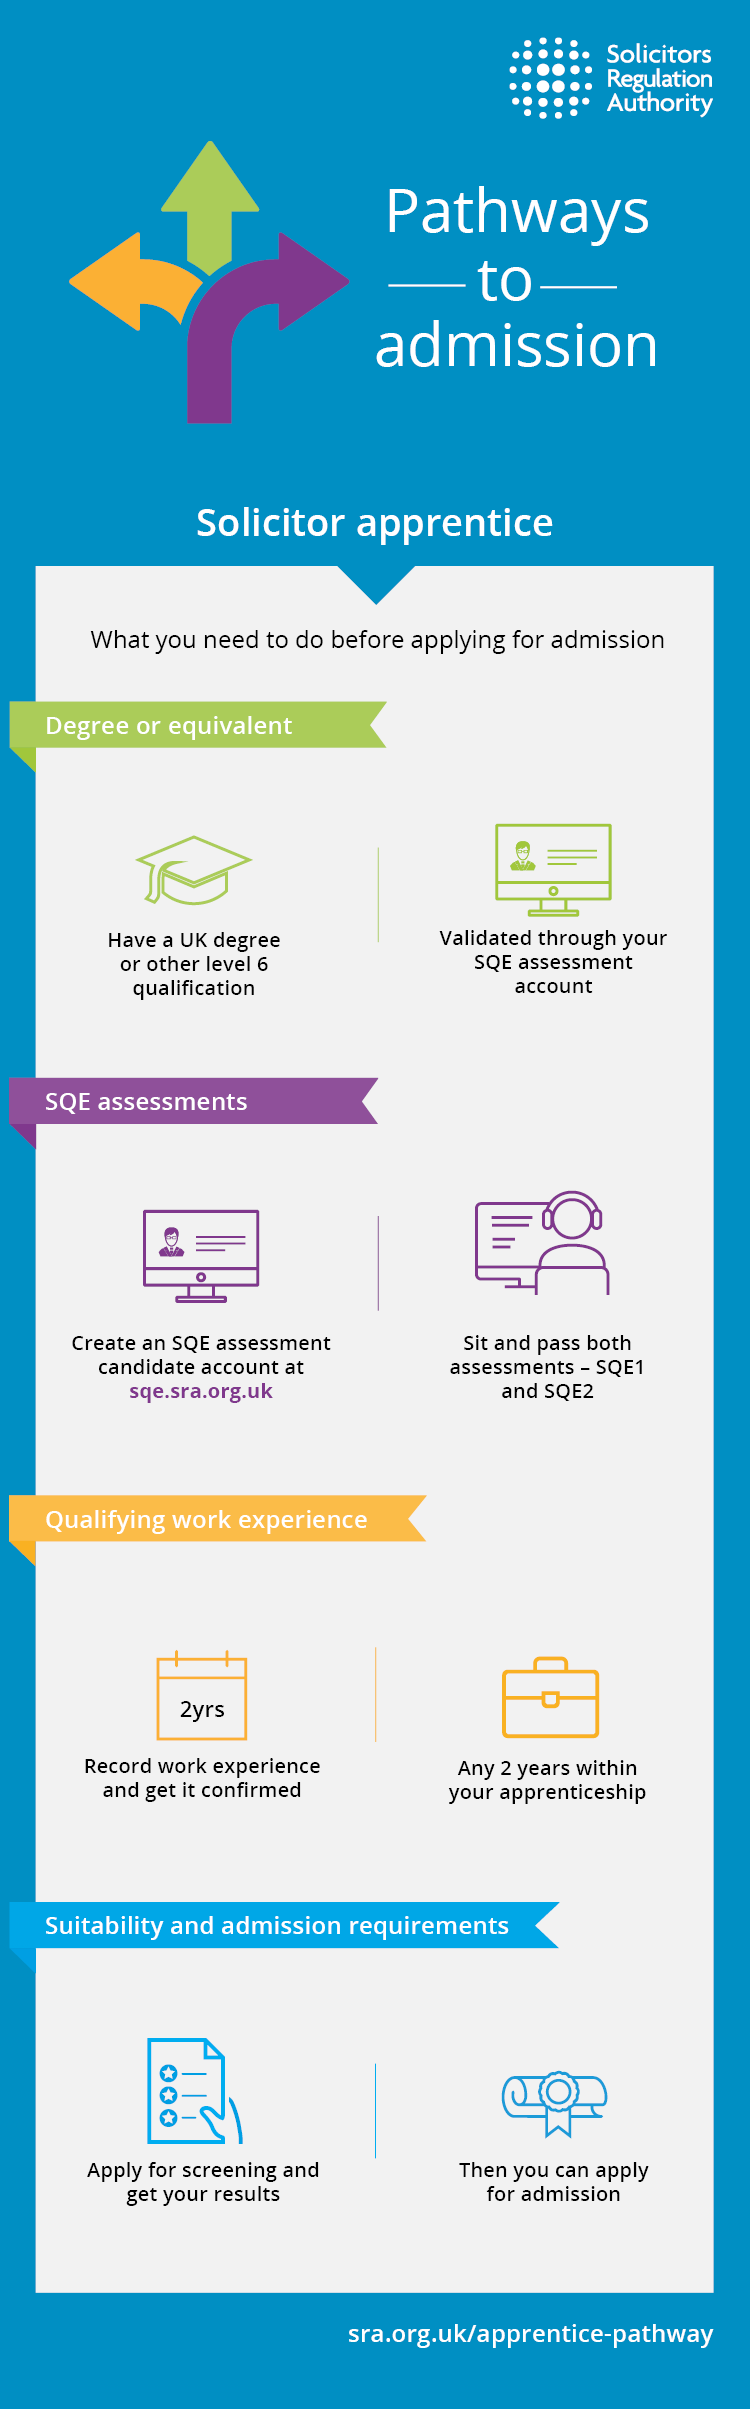 Pathways to admission - Solicitor apprentice infographic